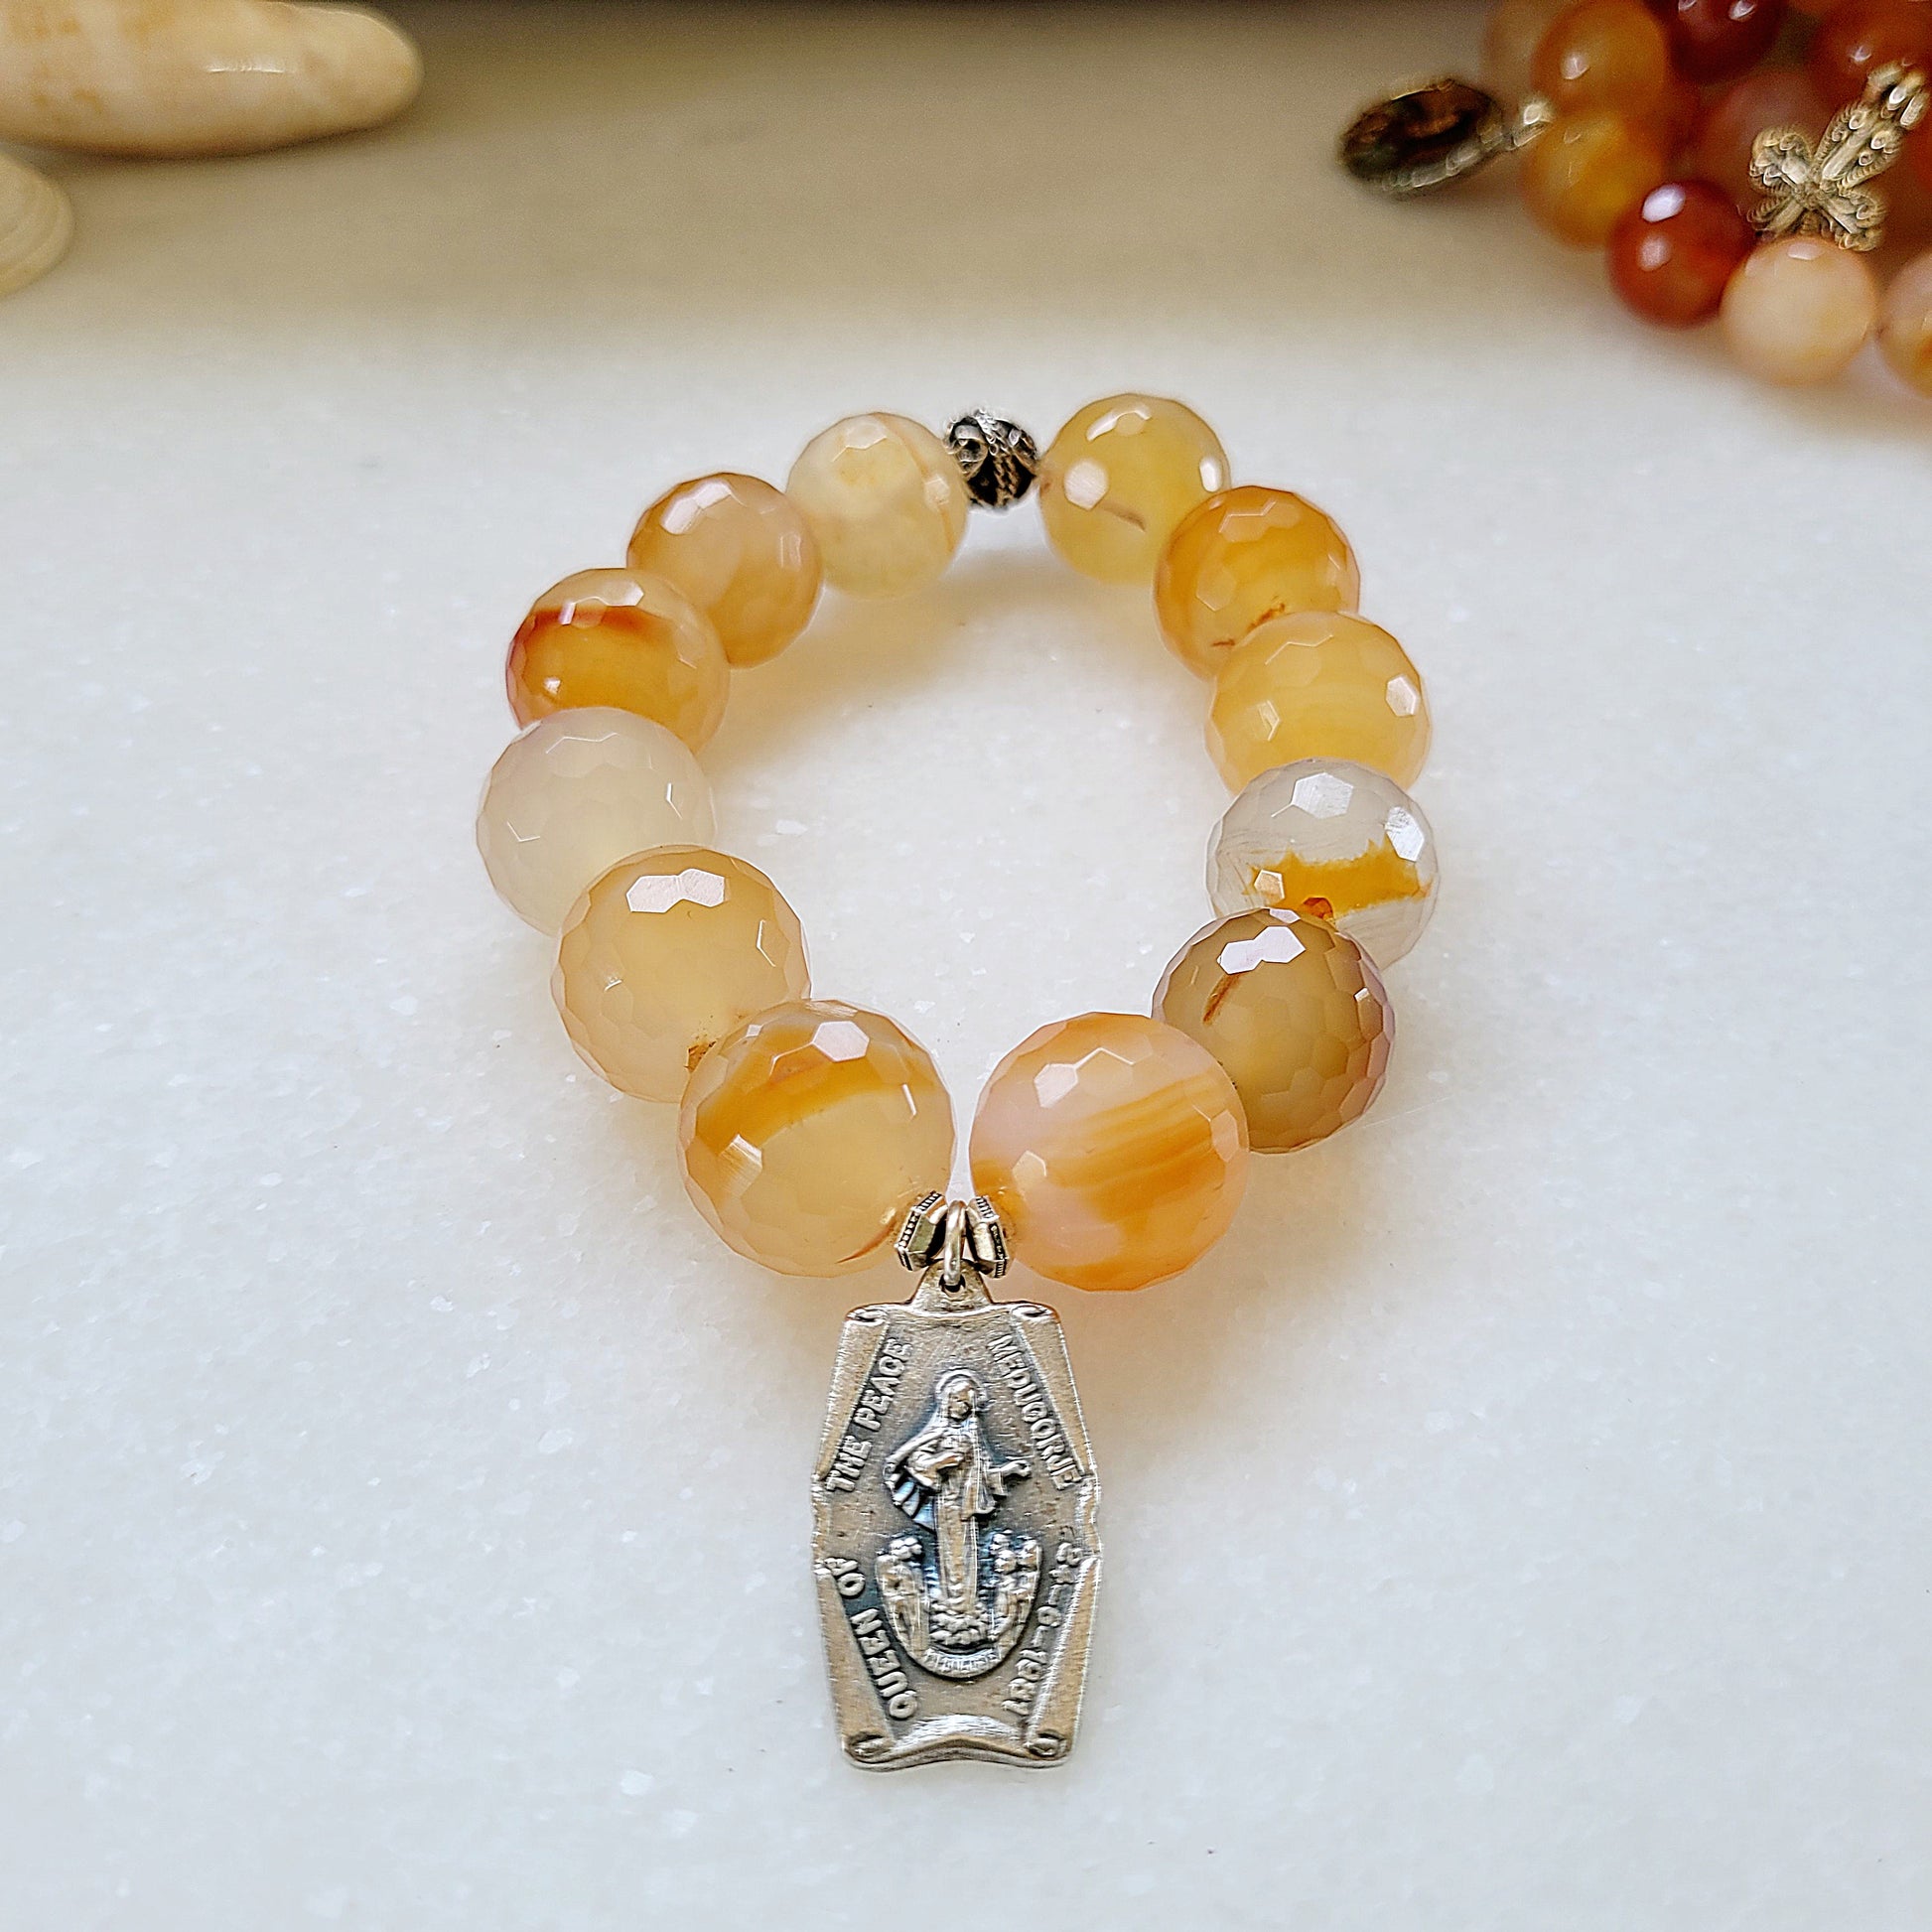 Carnelian Faceted 16mm Beaded Bracelet w/ Our Lady of Medjugorje Dated 1981 St. James Church Silver Medal - Afterlife Jewelry Designs